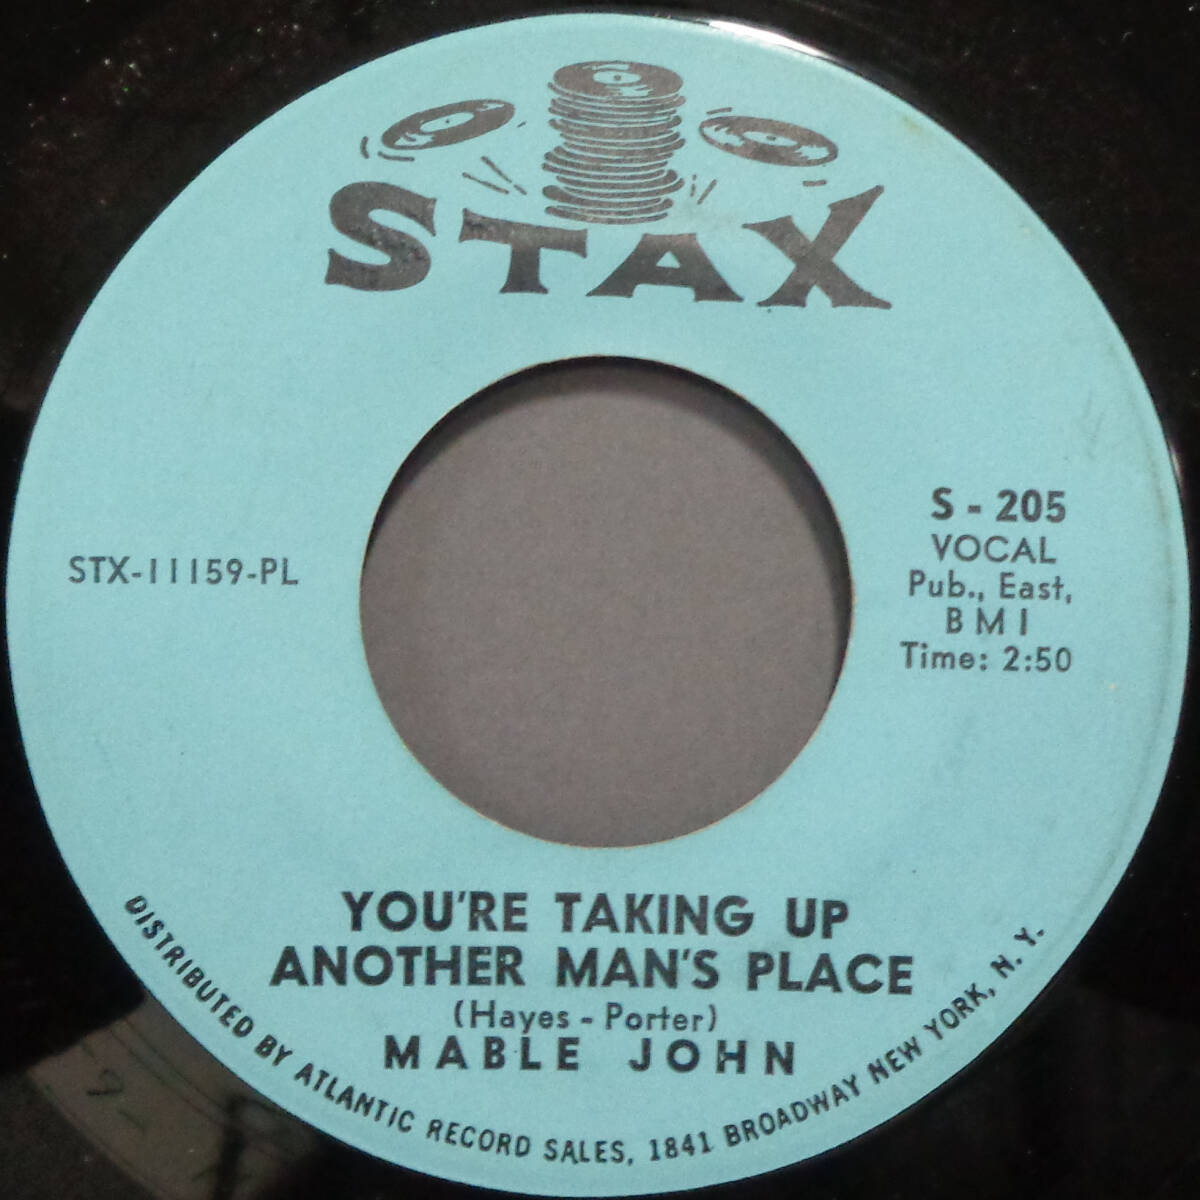 【SOUL 45】MABLE JOHN - YOU'RE TAKING UP ANOTHER MAN'S PLACE / IF YOU GIVE UP WHAT YOU GOT (s240509014) _画像1